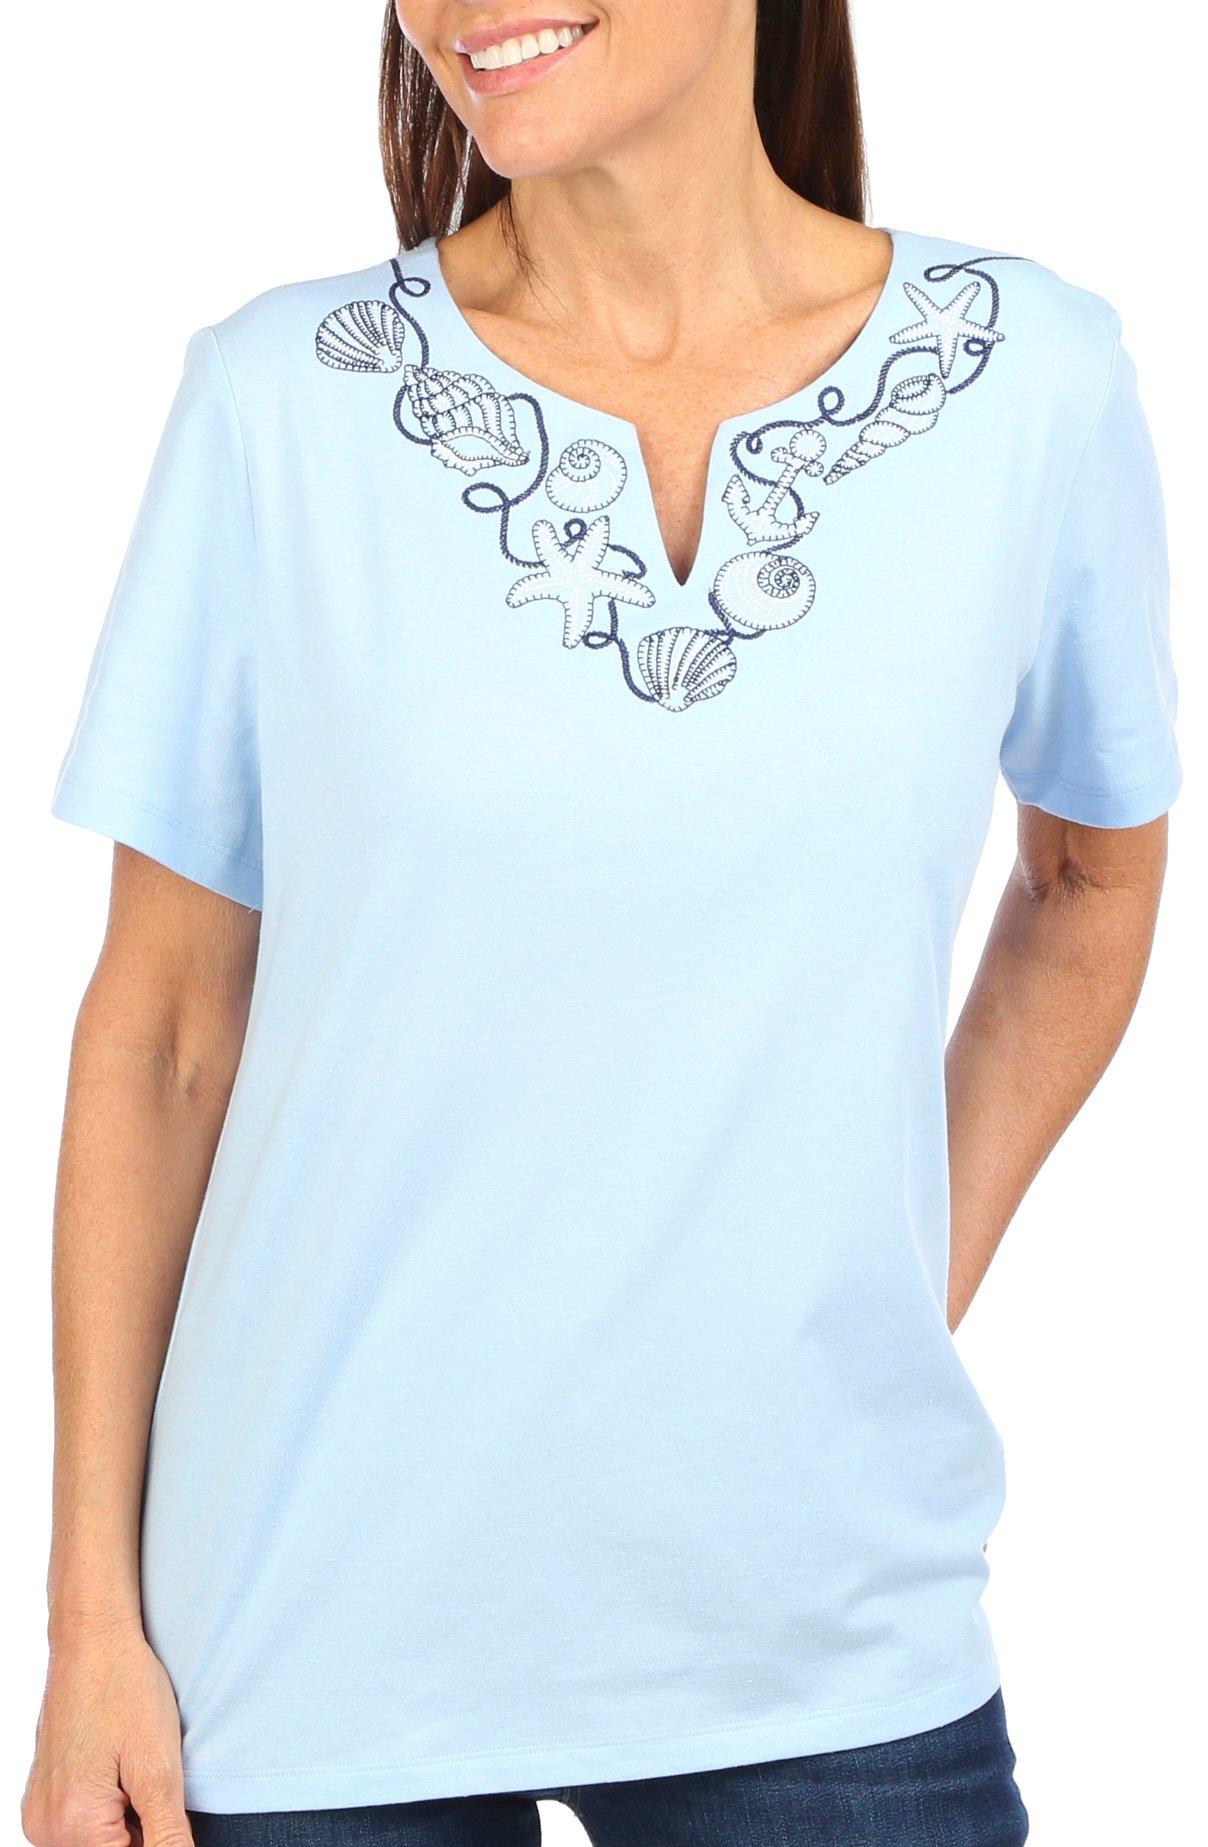 Womens Seashore Embroidered Notch Neck Short Sleeve Top